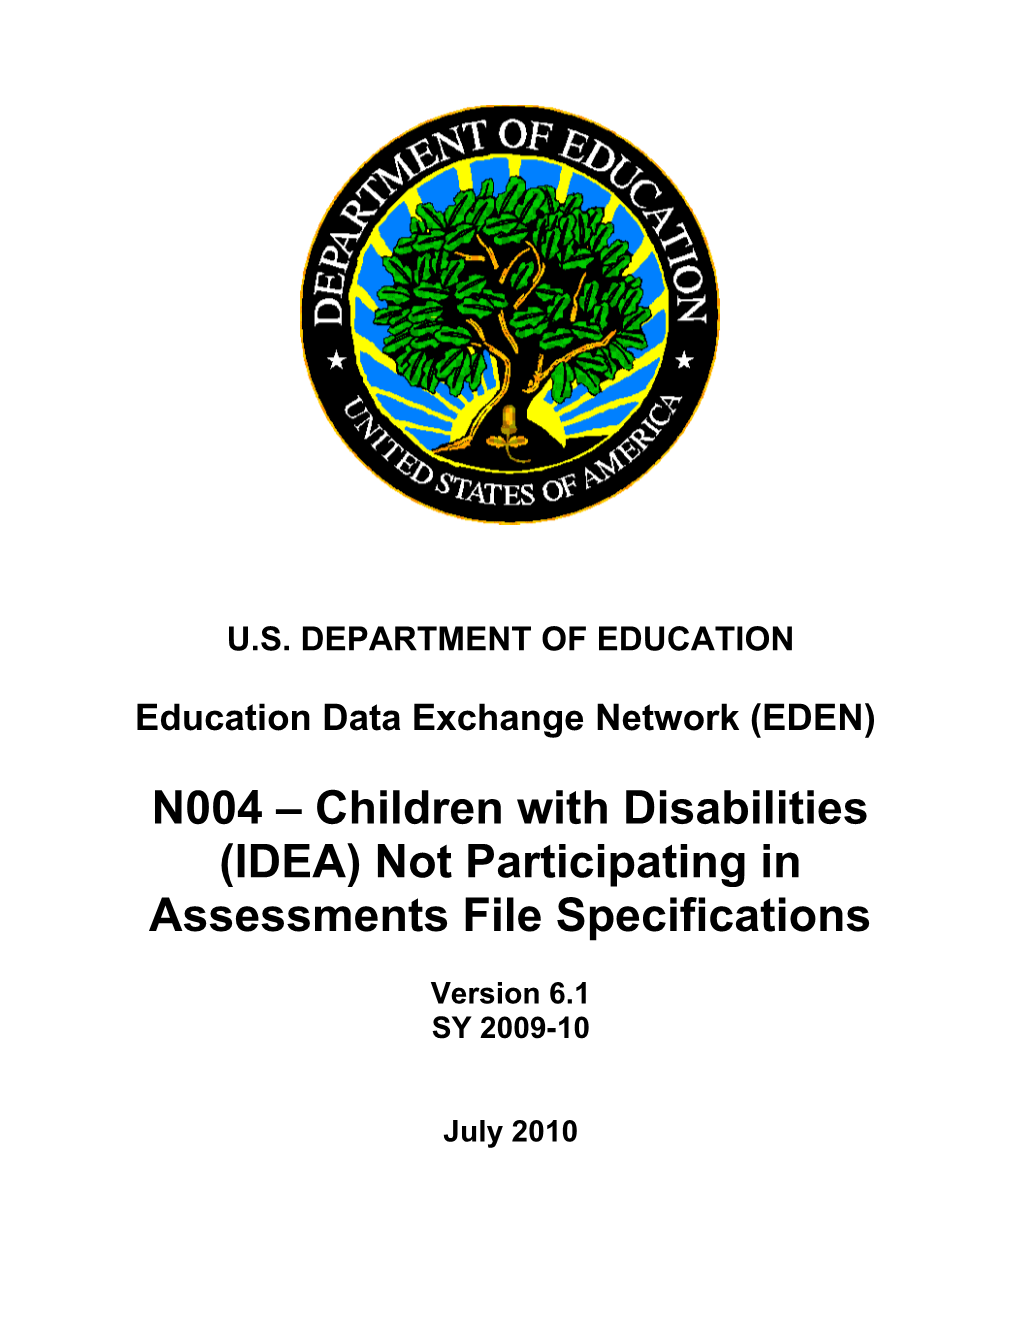 Children with Disabilities (IDEA) Not Participating in Assessments File Specifications